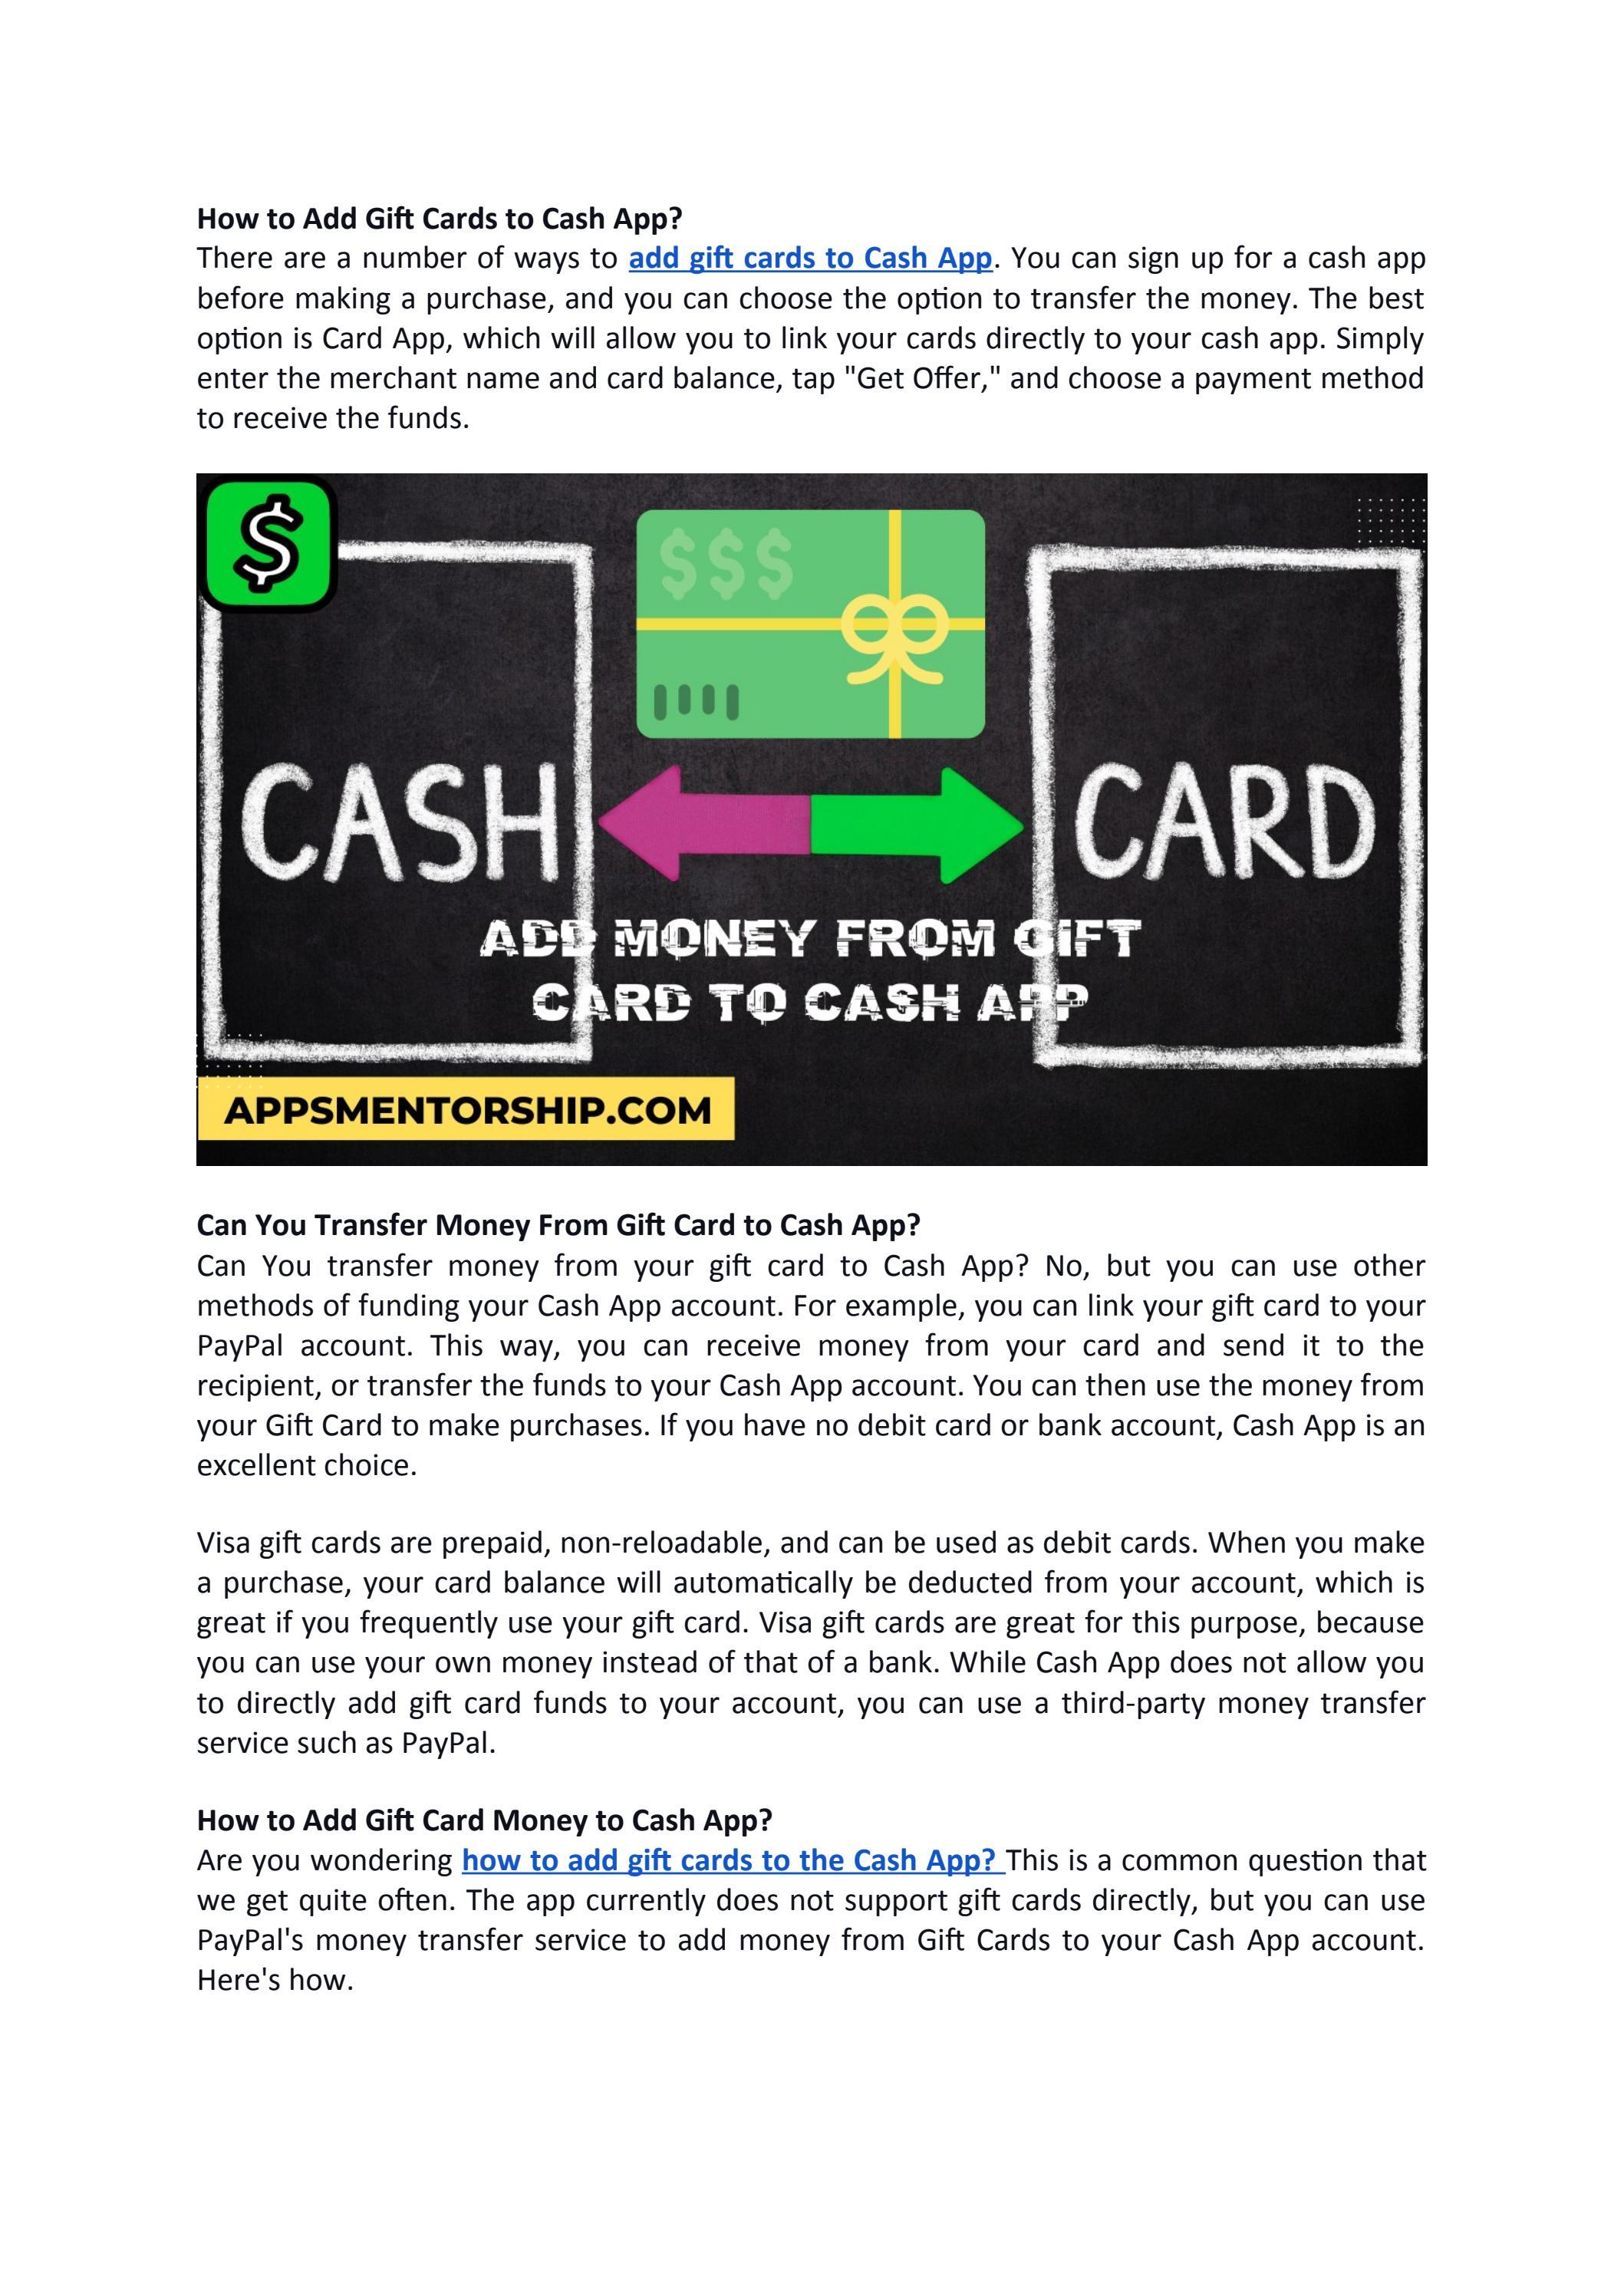 Cash App gift cards: Everything there is to know about them